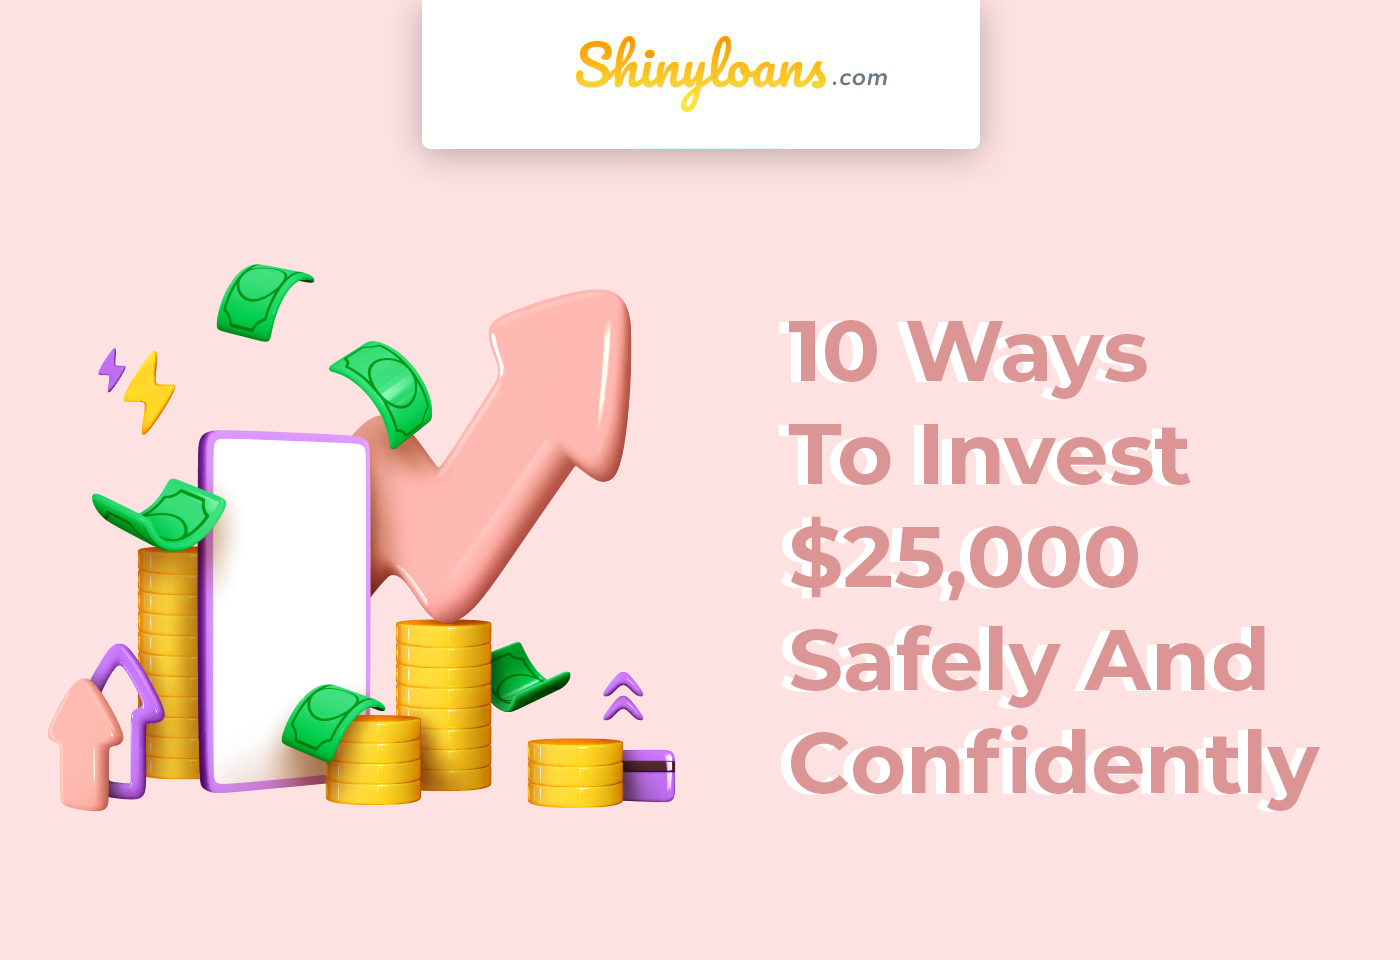 10 Ways To Invest $25,000 Safely And Confidently